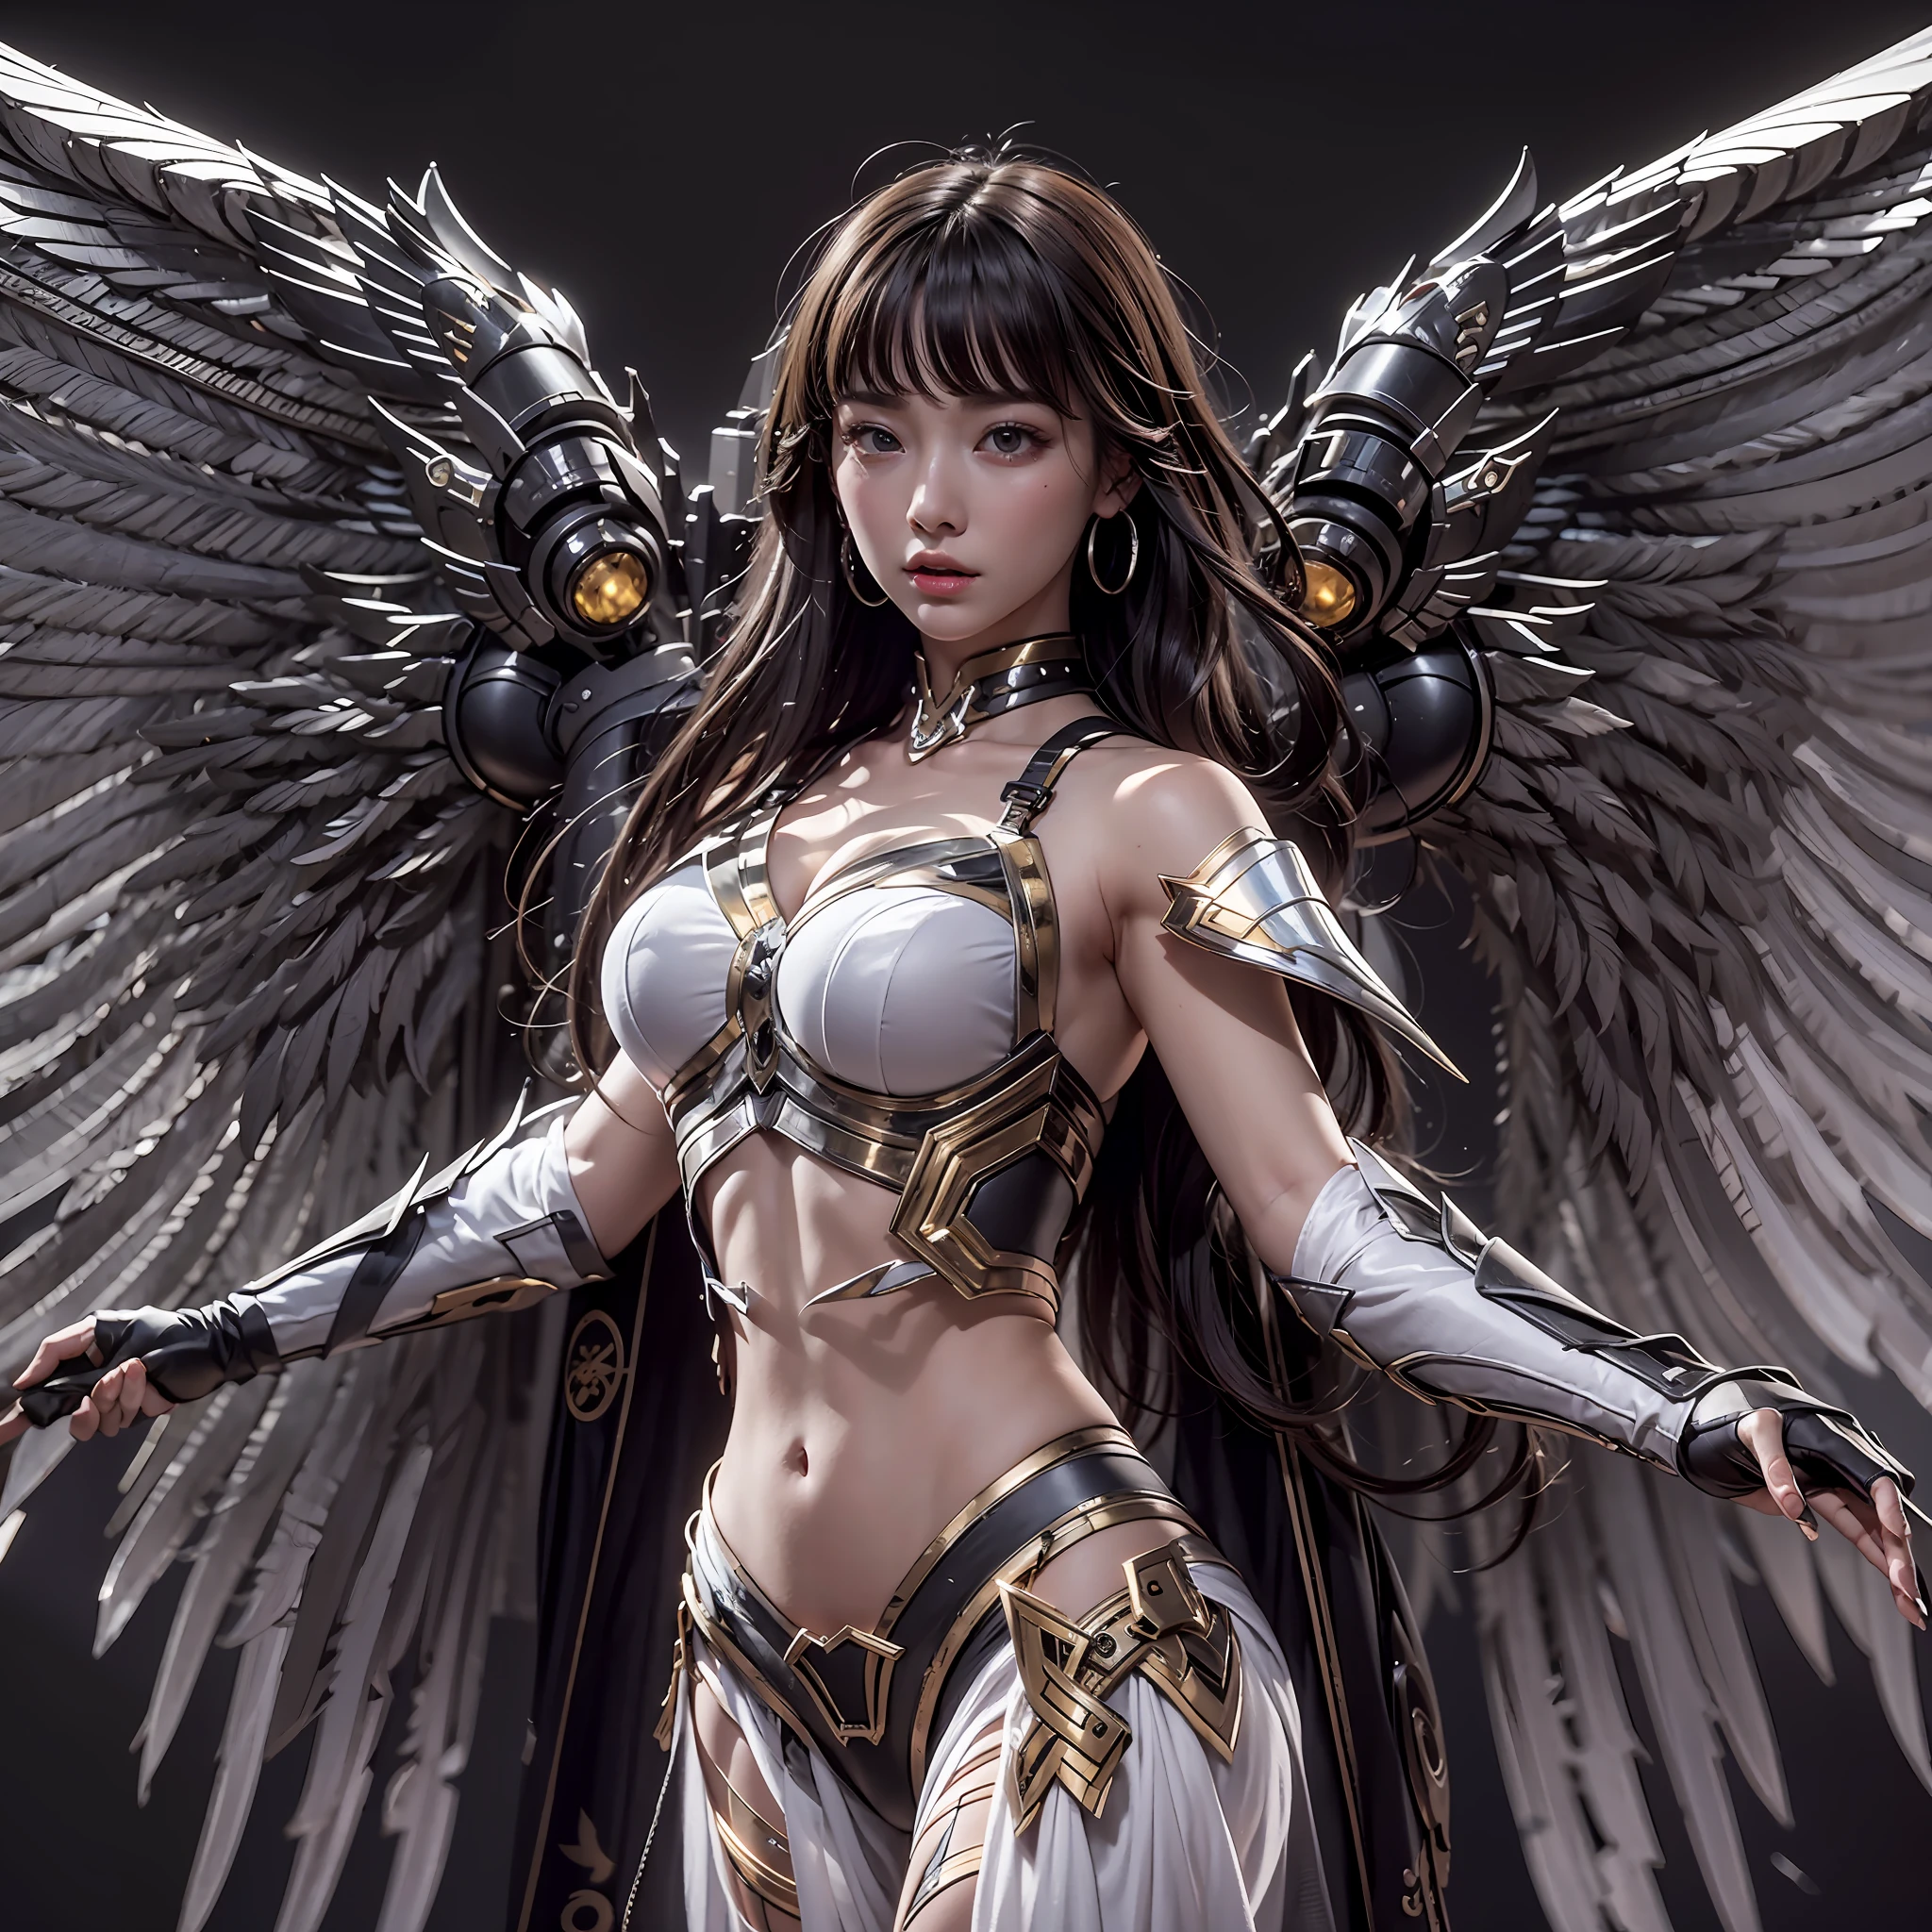 1girll，Dark Angel Warrior，(((On the back there is a pair of large black half-body wings)))，Black titanium，Metal wingetal wings）），（（Black gold metal armor）），high detal，（beautifulface），Perfect facial features，red tinted hair，Black and gold greatsword，Futuristic technical background，apathy、Aloof、On the high horse，atmospurate、macro，Realistis，hdr（HighDynamicRange）、Ray traching、NVIDIA RTX、Hyper-Resolution、illusory 5、sub surface scattering、post-proces、Anisotropy Filtering、depth of fieldaximum definition and sharpness，Surface coloring、Accurately simulate light-material interactions、perfectly proportions、rendering by octane、largeaperture、Low ISO、White balance、the rule of thirds、8K raw data、lightand shade contrast